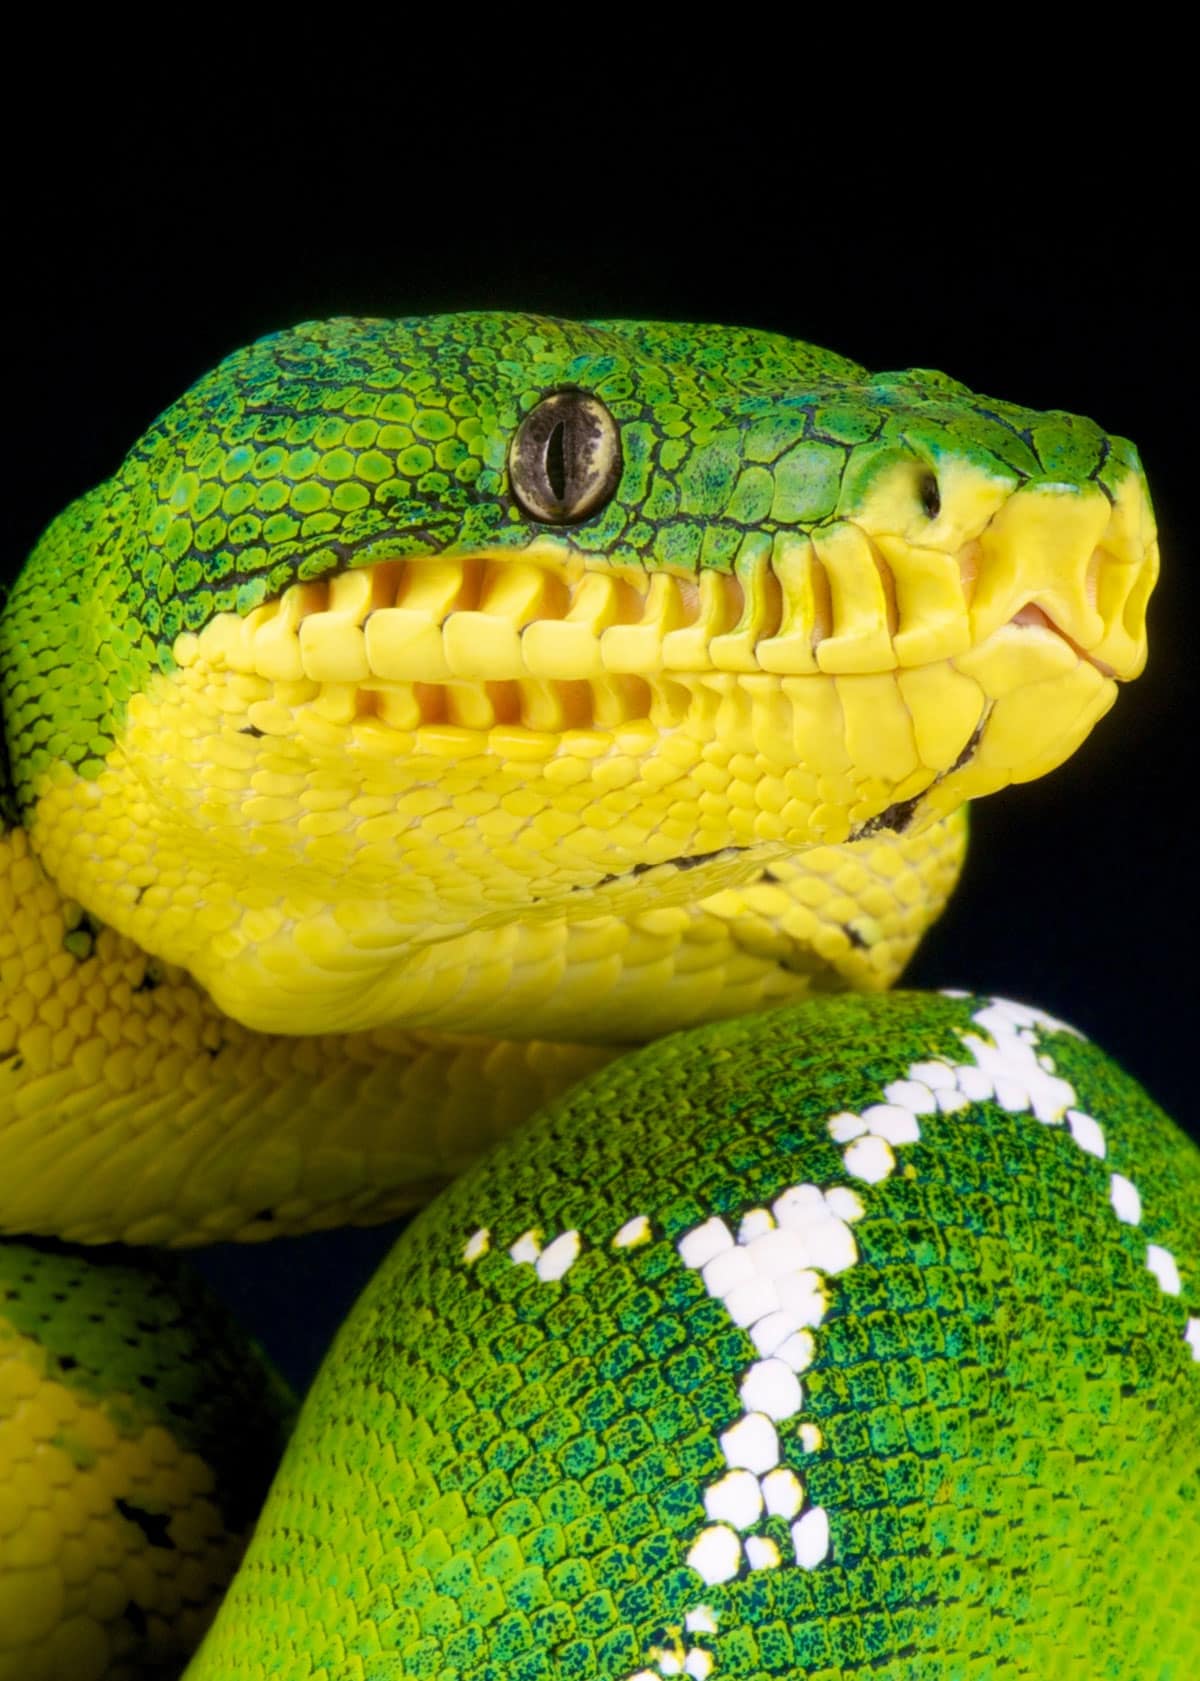 Facts about emerald green boas